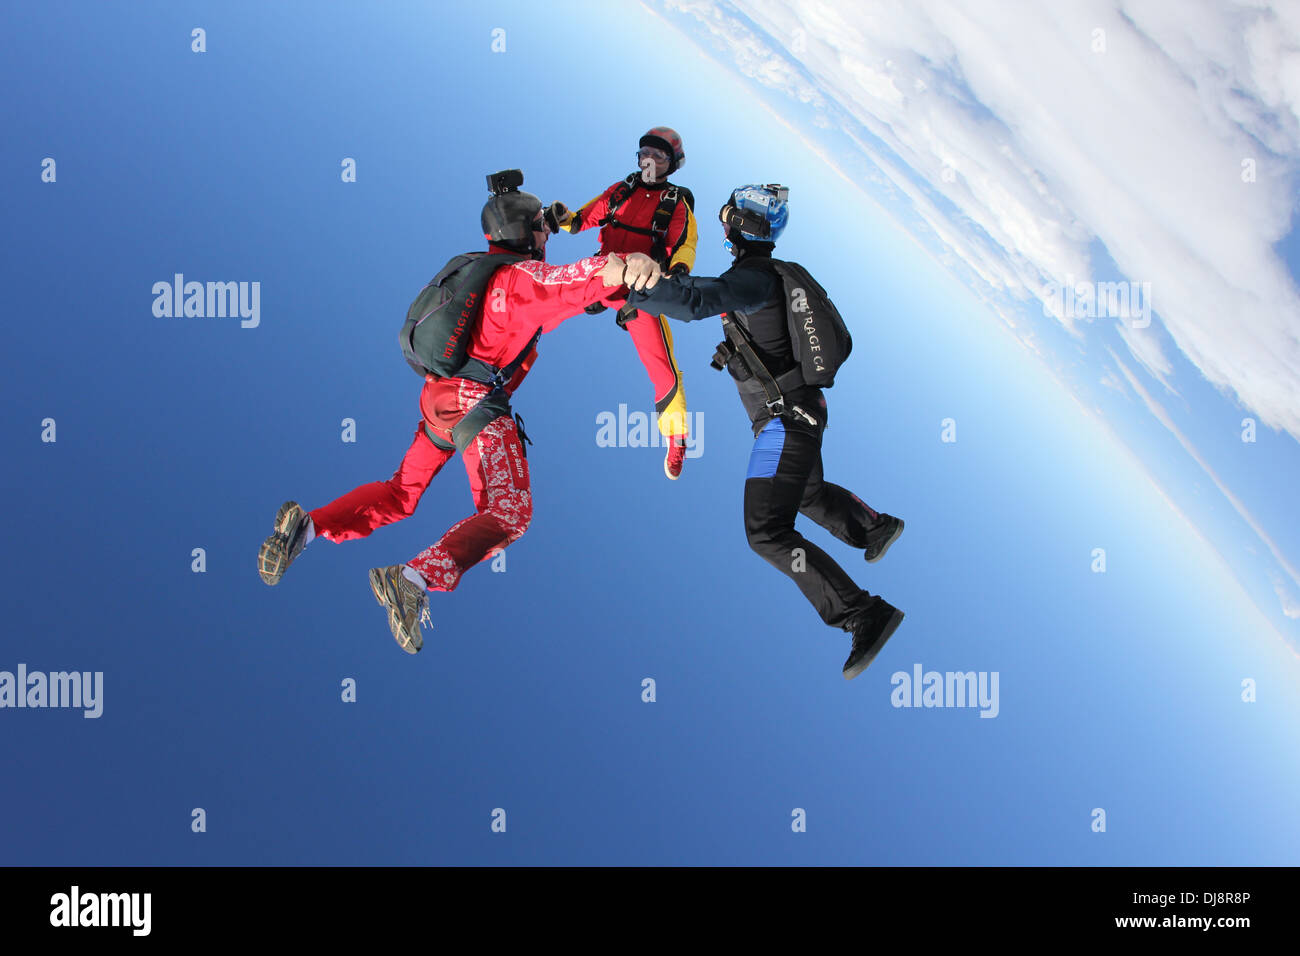 This skydiver team is flying head over in the blue sky. They hold hand and form a star formation together over clouds. Stock Photo